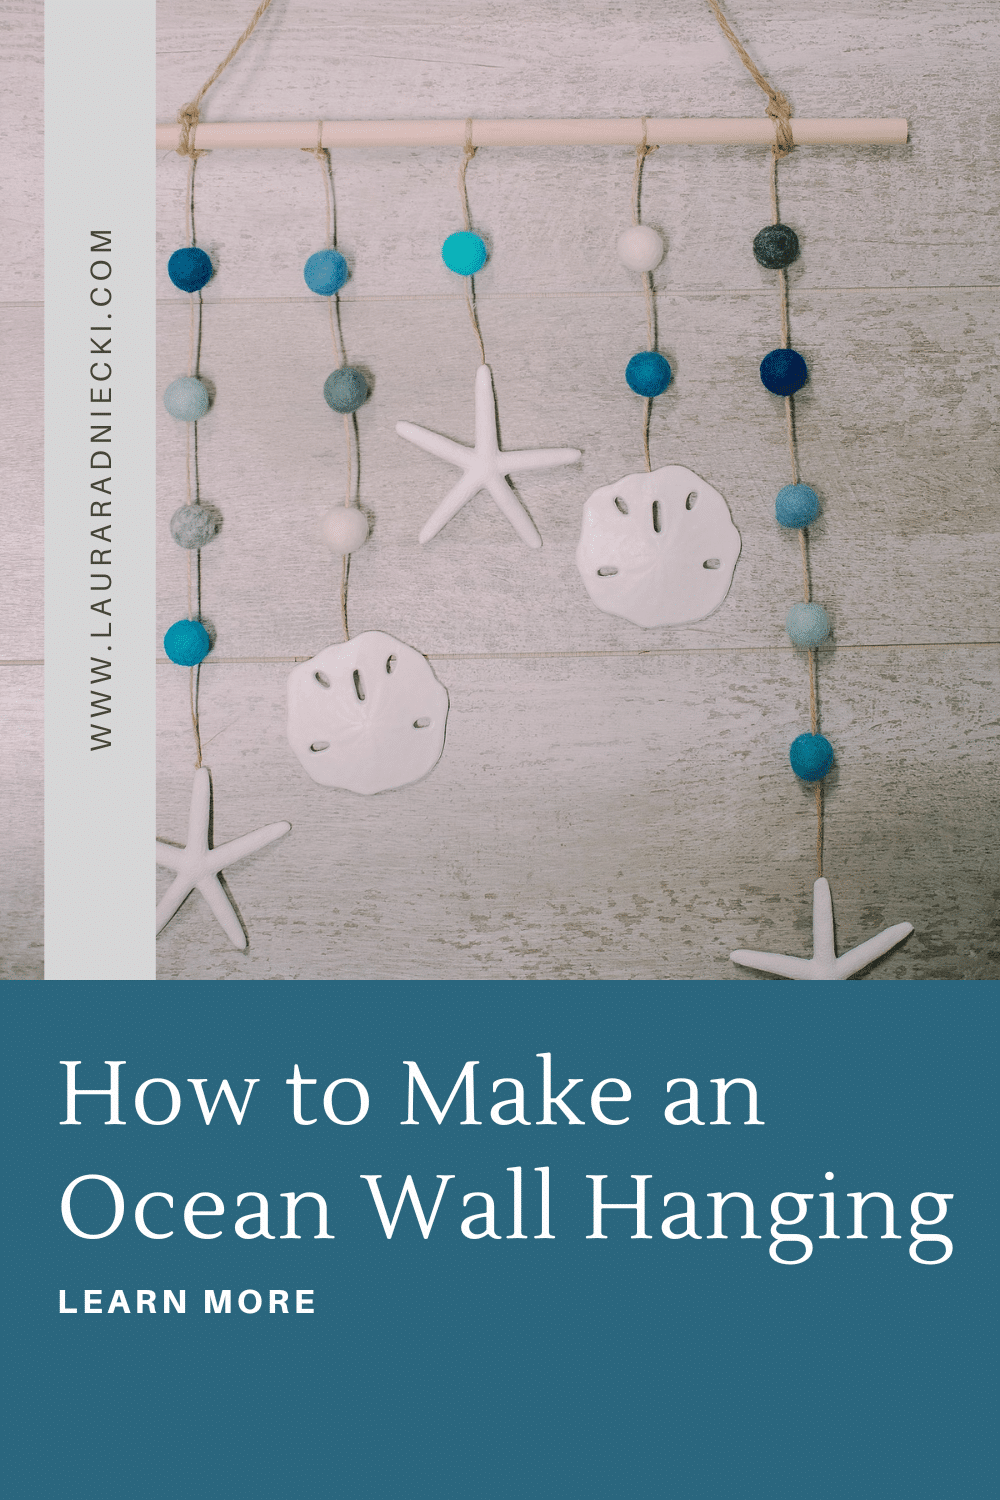 How to Make a DIY Ocean Wall Hanging